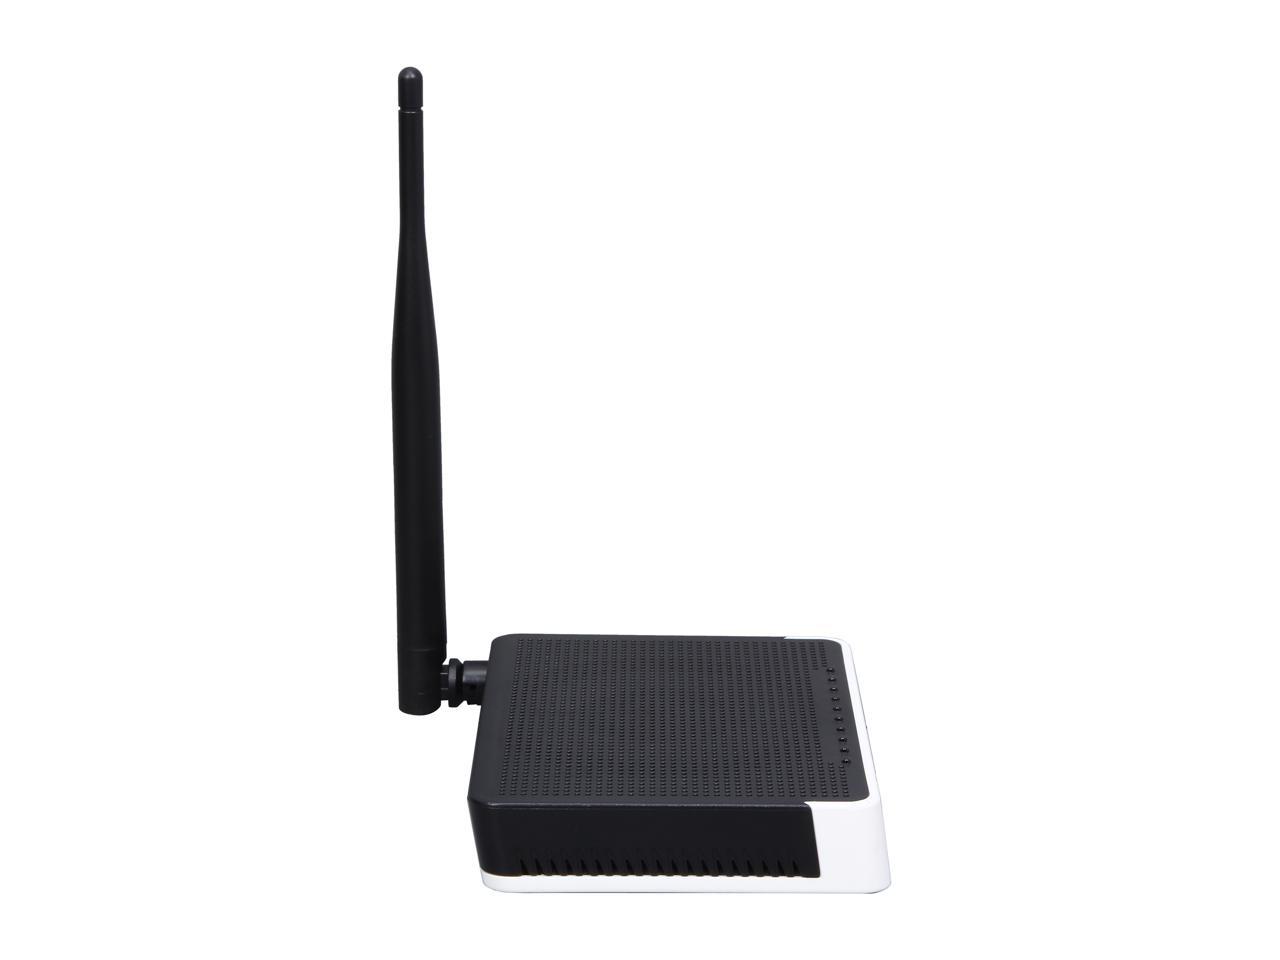 Put For a day trip Mechanic NETIS WF2411 150Mbps Wireless N Router - Newegg.com